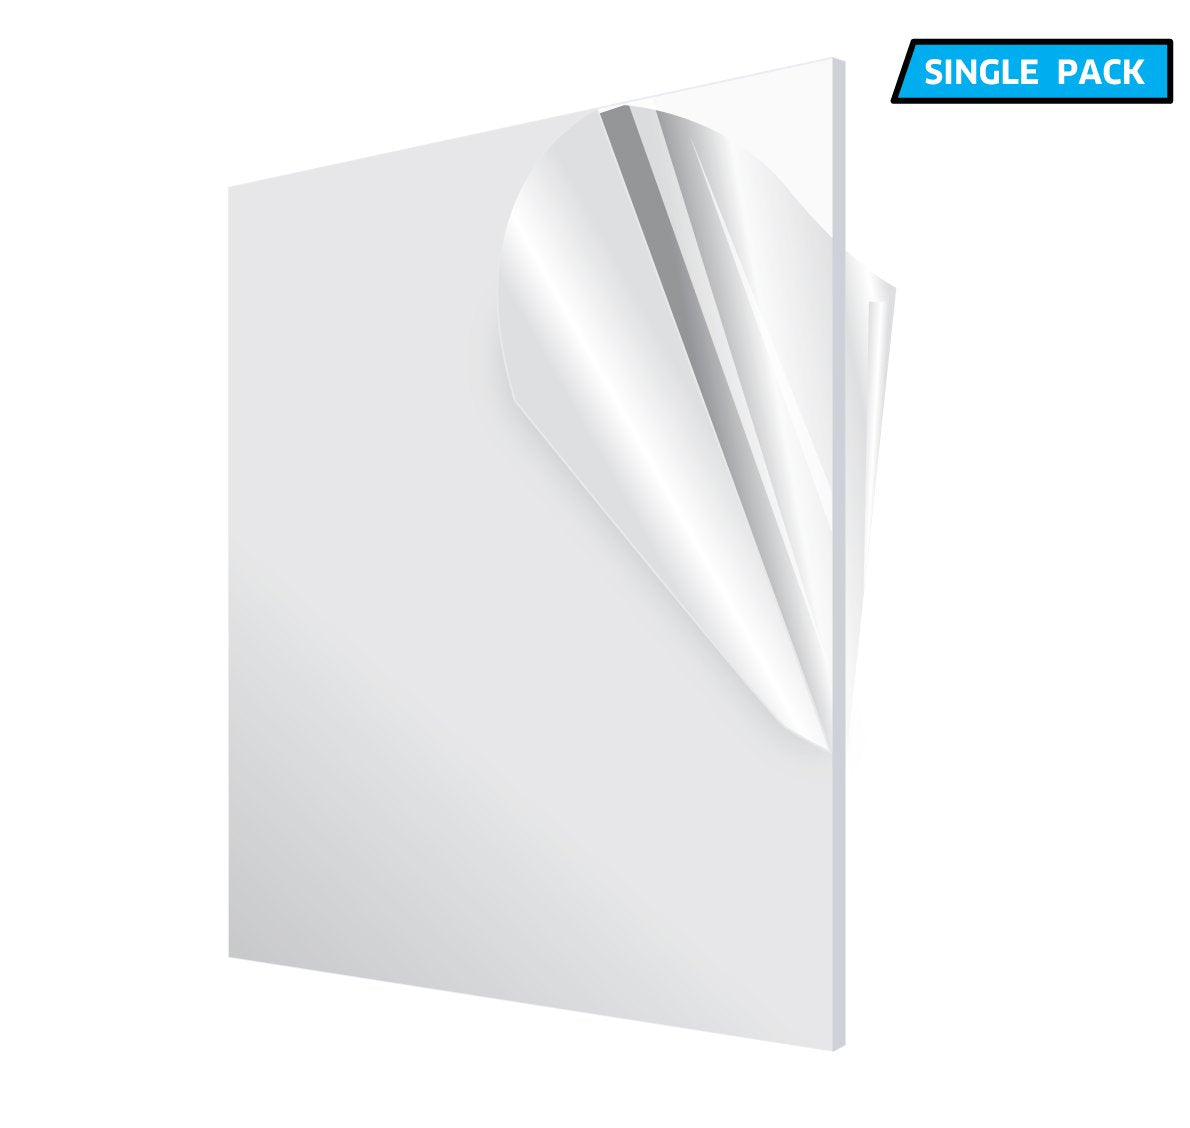 AdirOffice Acrylic Plexiglass Sheet 12��x12�� 1/8'' Thick - Transparent, Plastic Sheeting - Durable, Water Resistant & Weatherproof - Multipurpose & Ideal for Countless Uses, Clear Product Name  - Like New